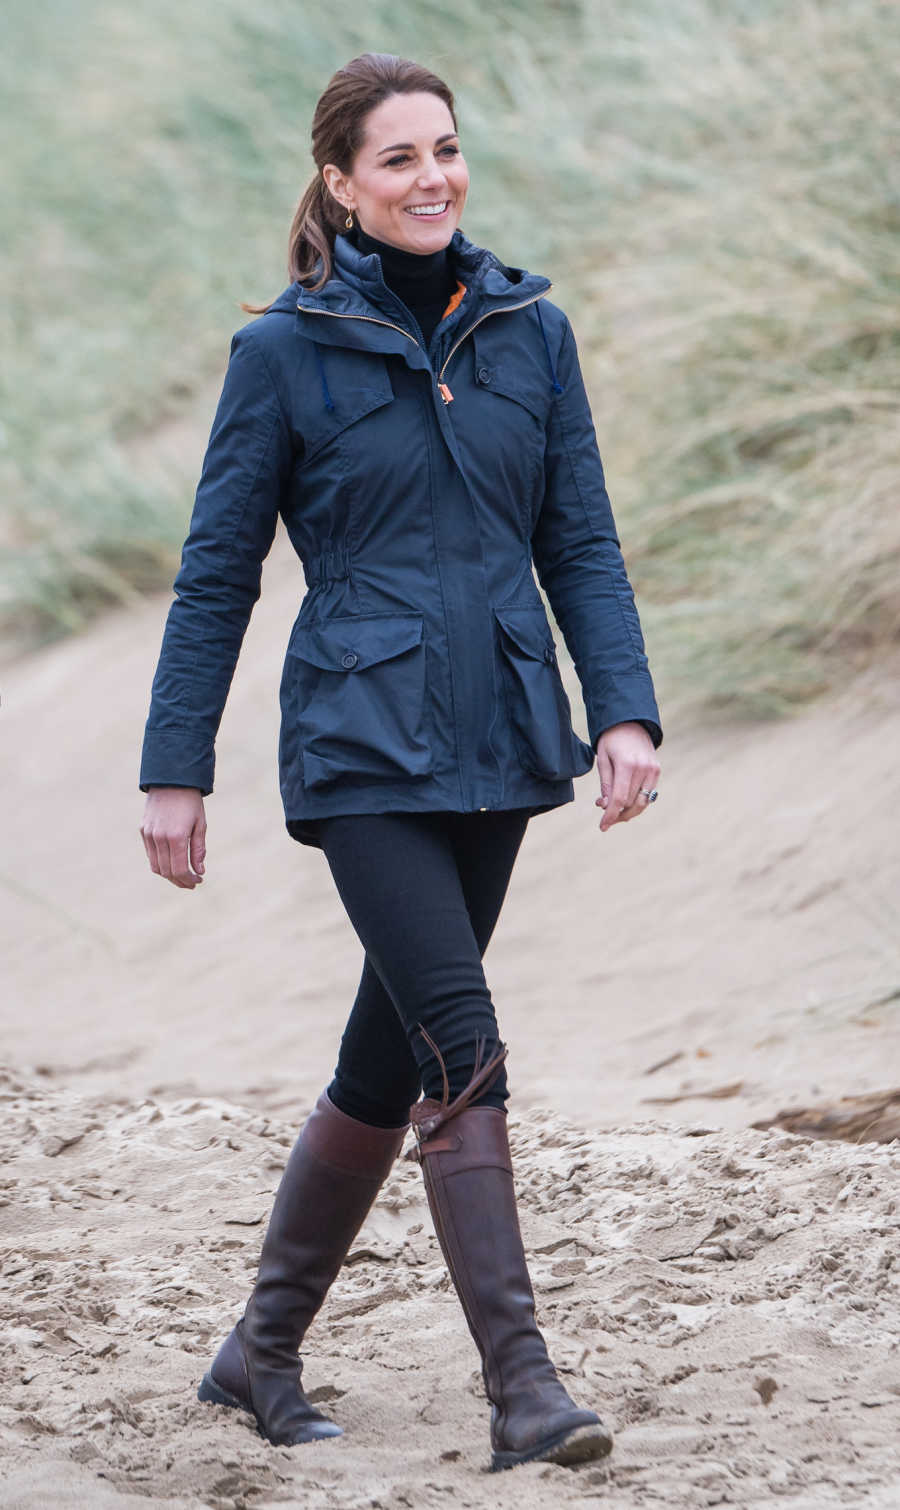 20 Times Kate Middleton Styled Her Knee-High Boots Perfectly | CafeMom.com